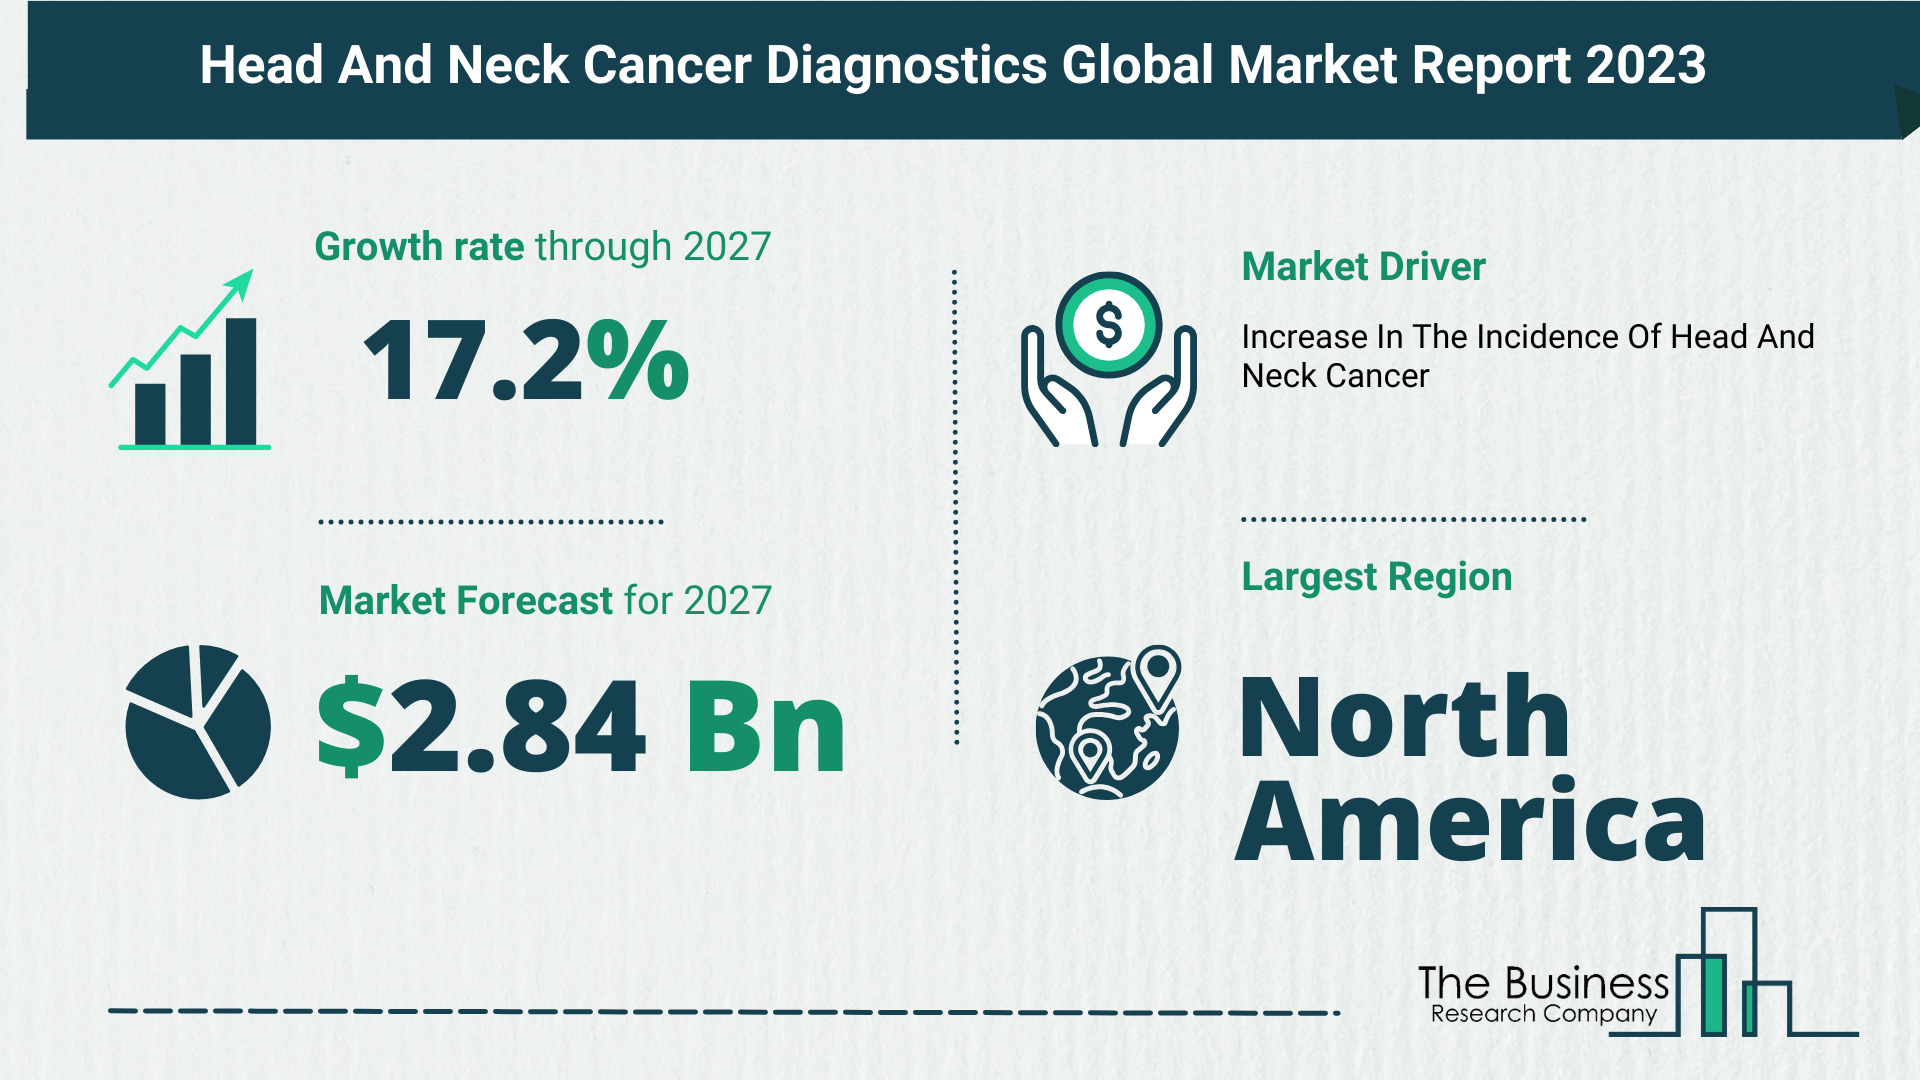 5 Key Insights On The Head And Neck Cancer Diagnostics Market 2023